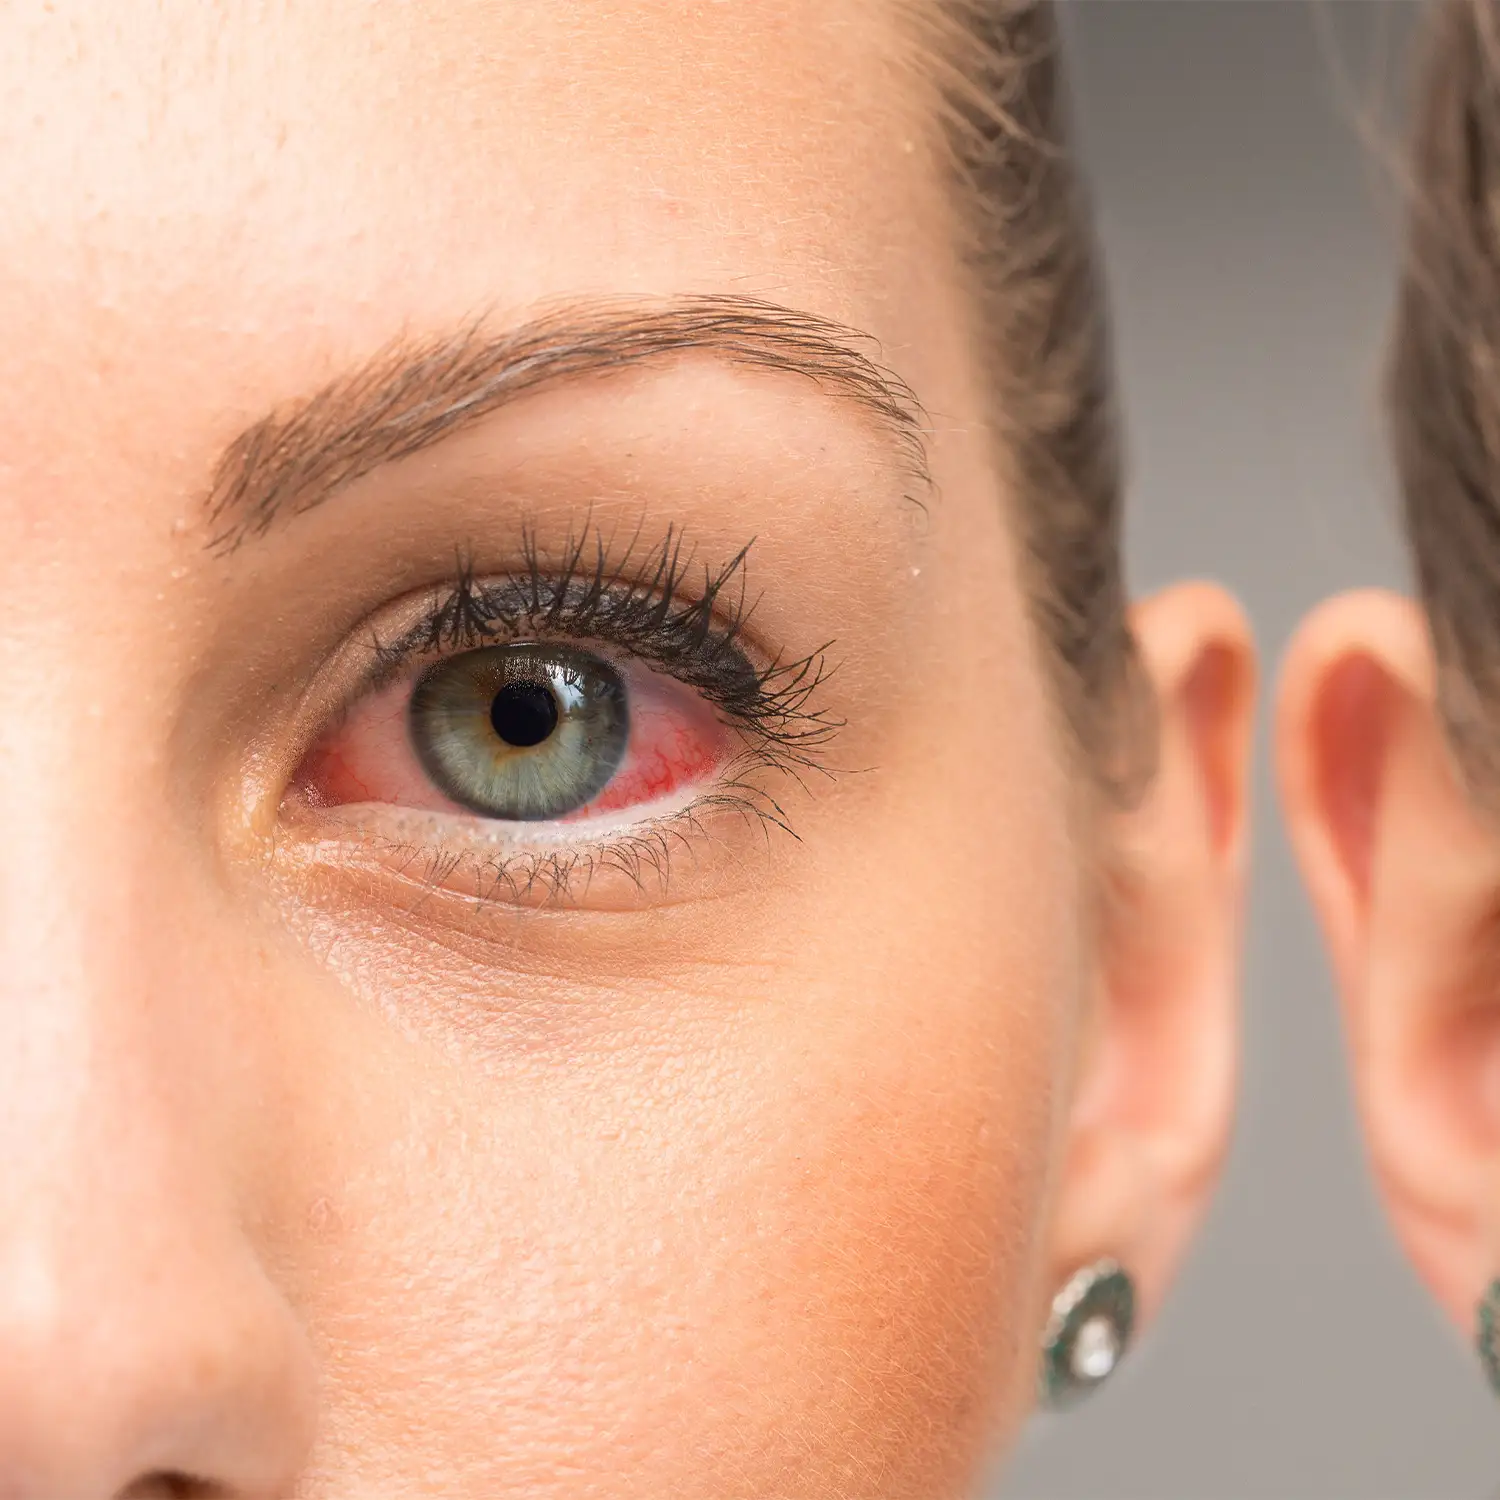 8 Great Home Remedies For Eye Infection -